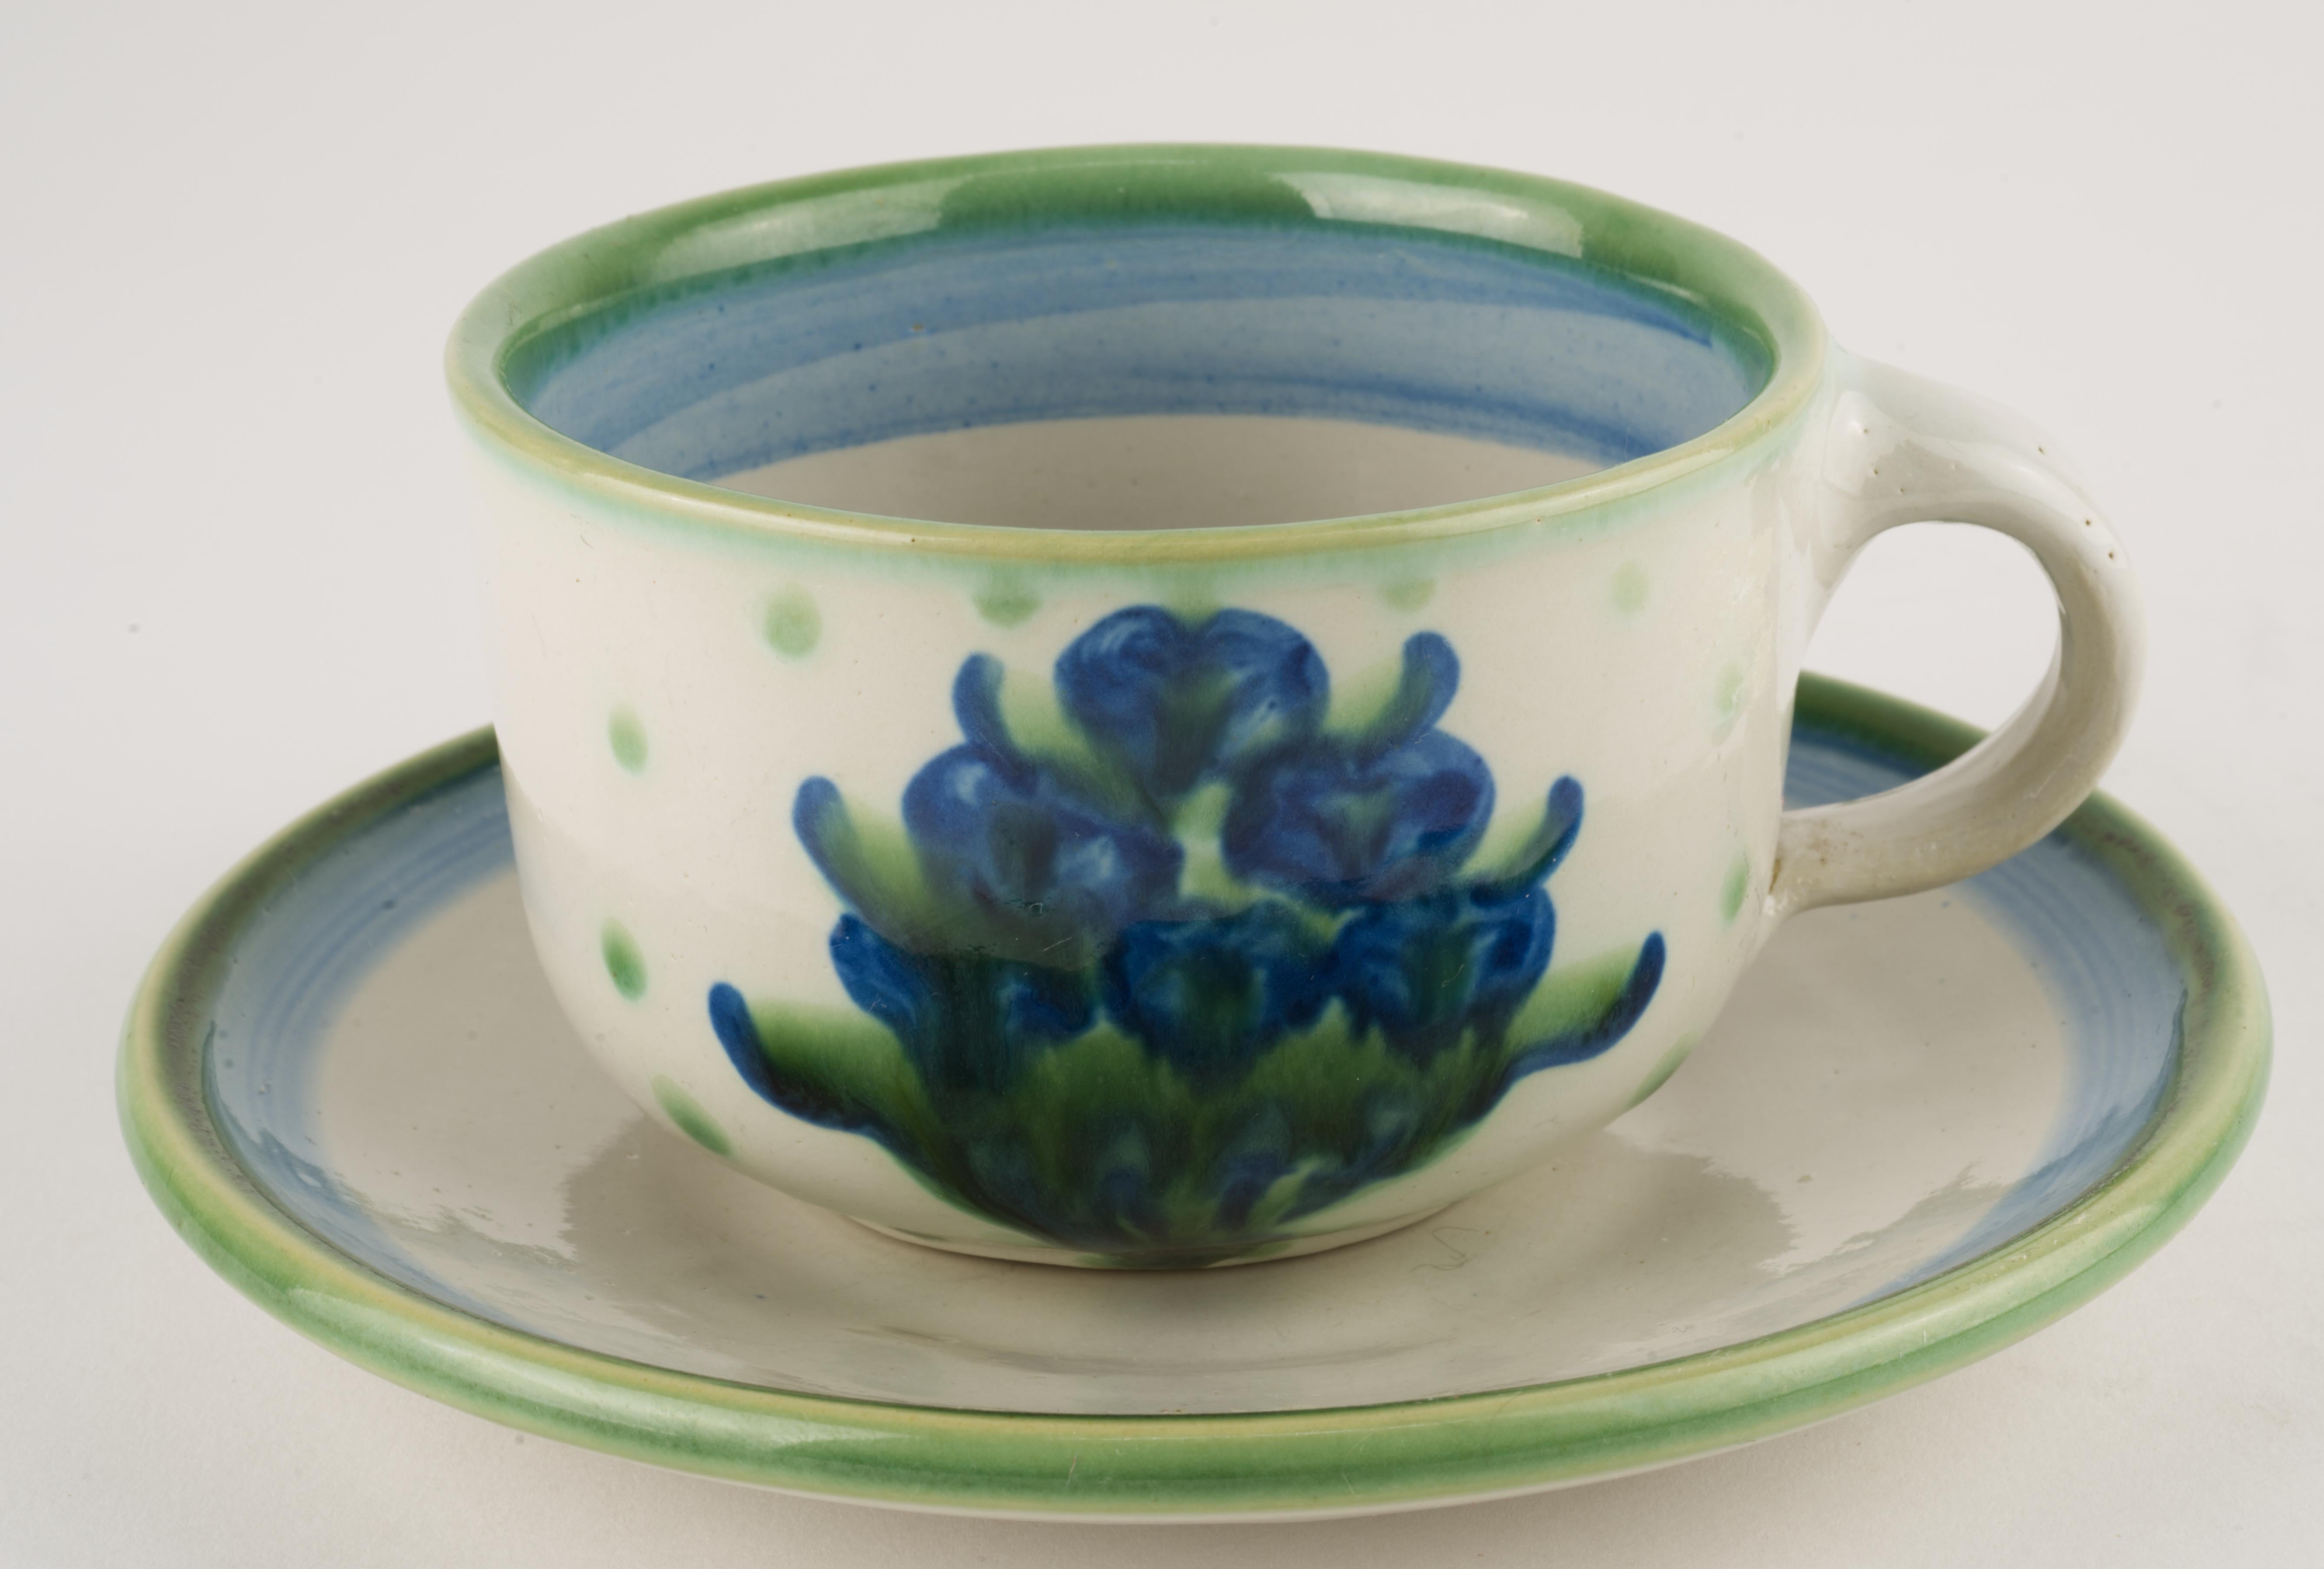  Cup and saucer were thrown and hand painted by Hadley Pottery in Louisville, Kentucky, in Bouquet pattern. The pattern consists of a stylized basket with blue dots/flowers (sometimes referred to as blueberries) surrounded by green dots. Pieces are